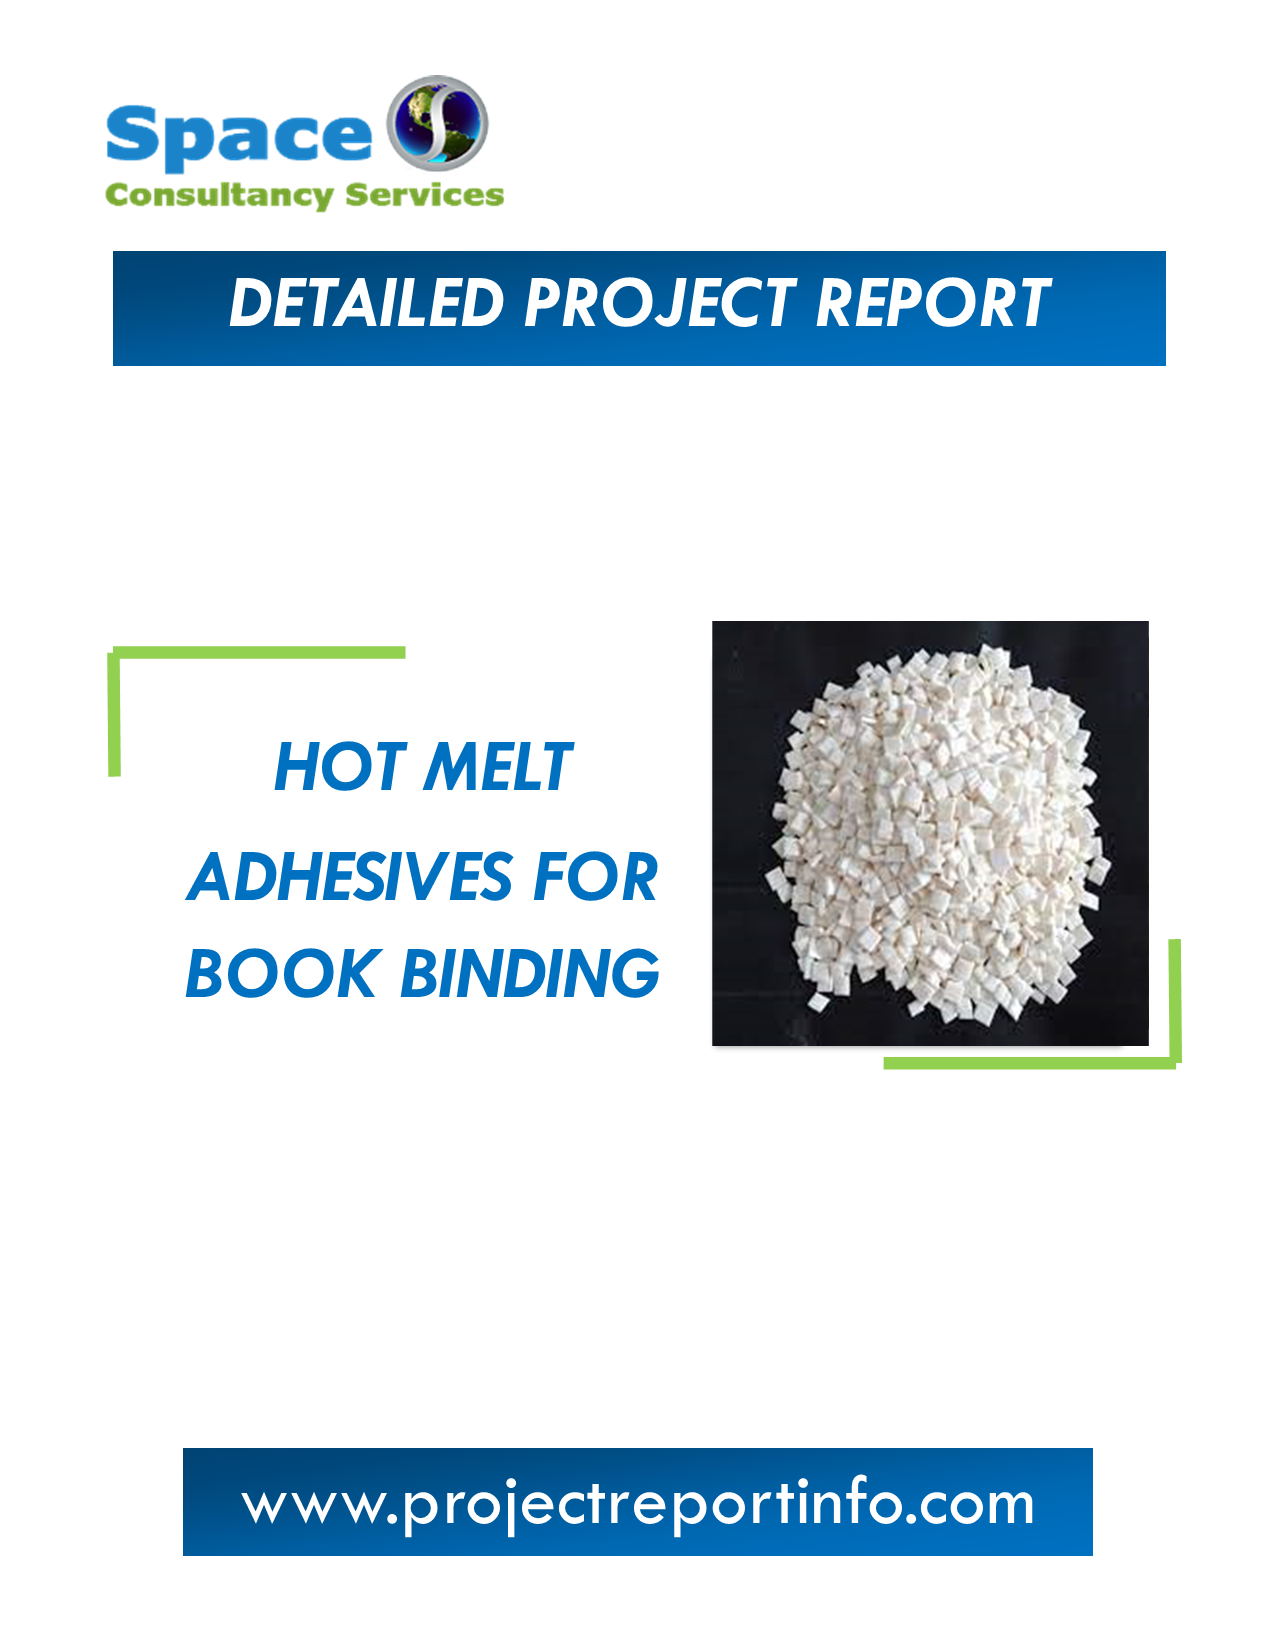 Project Report on Hot Melt Adhesives for Book Binding